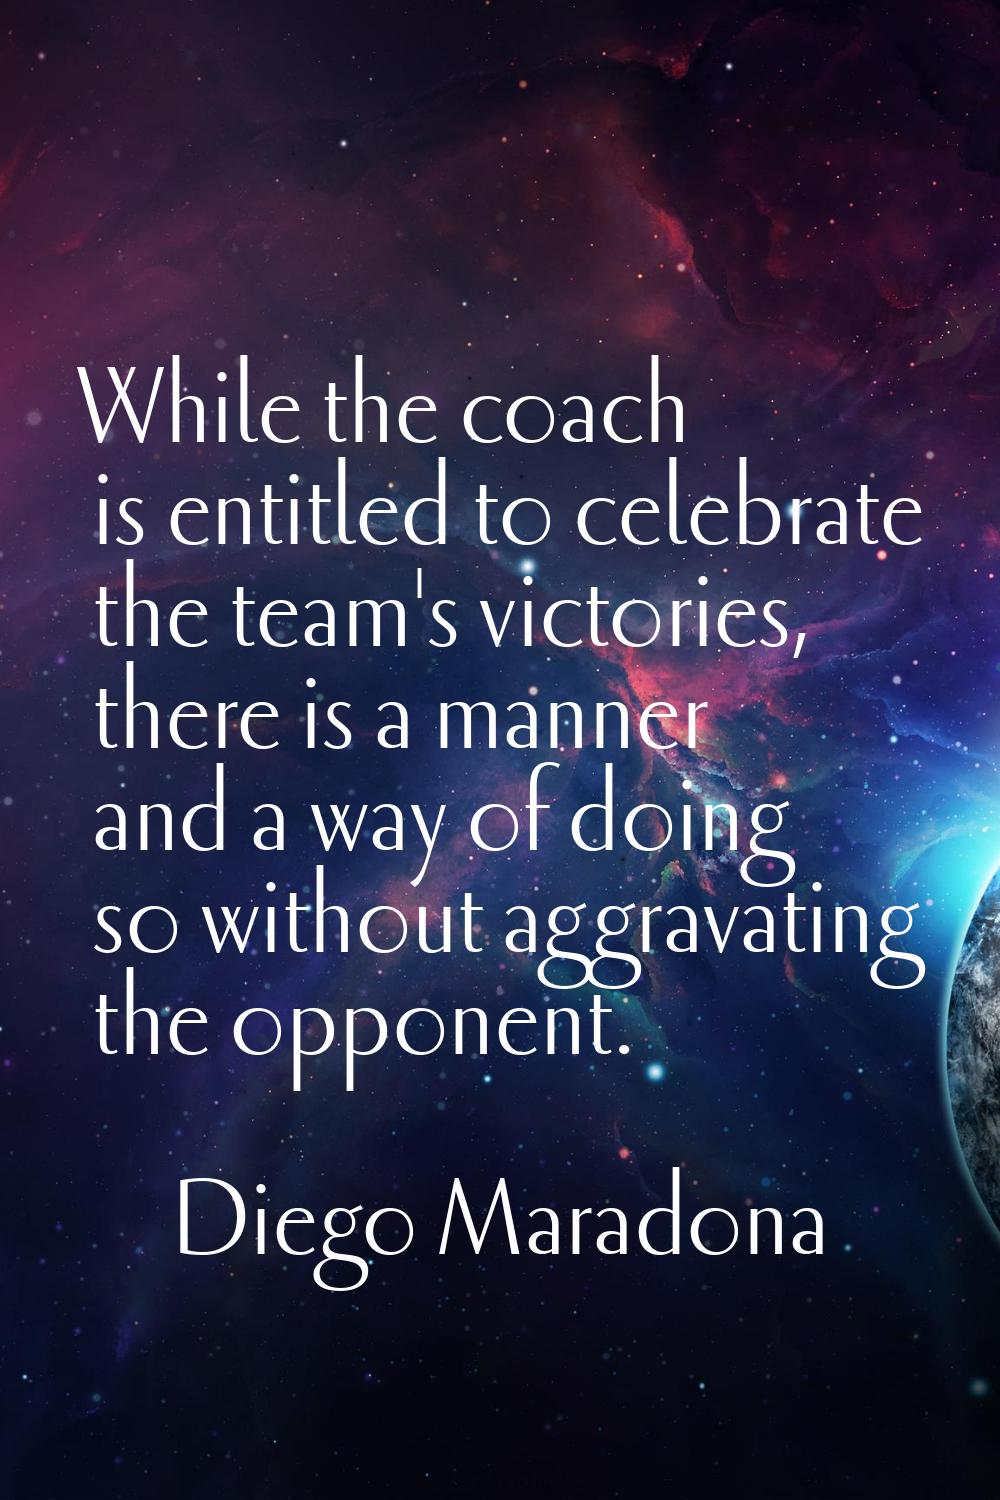 While the coach is entitled to celebrate the team's victories, there is a manner and a way of doing